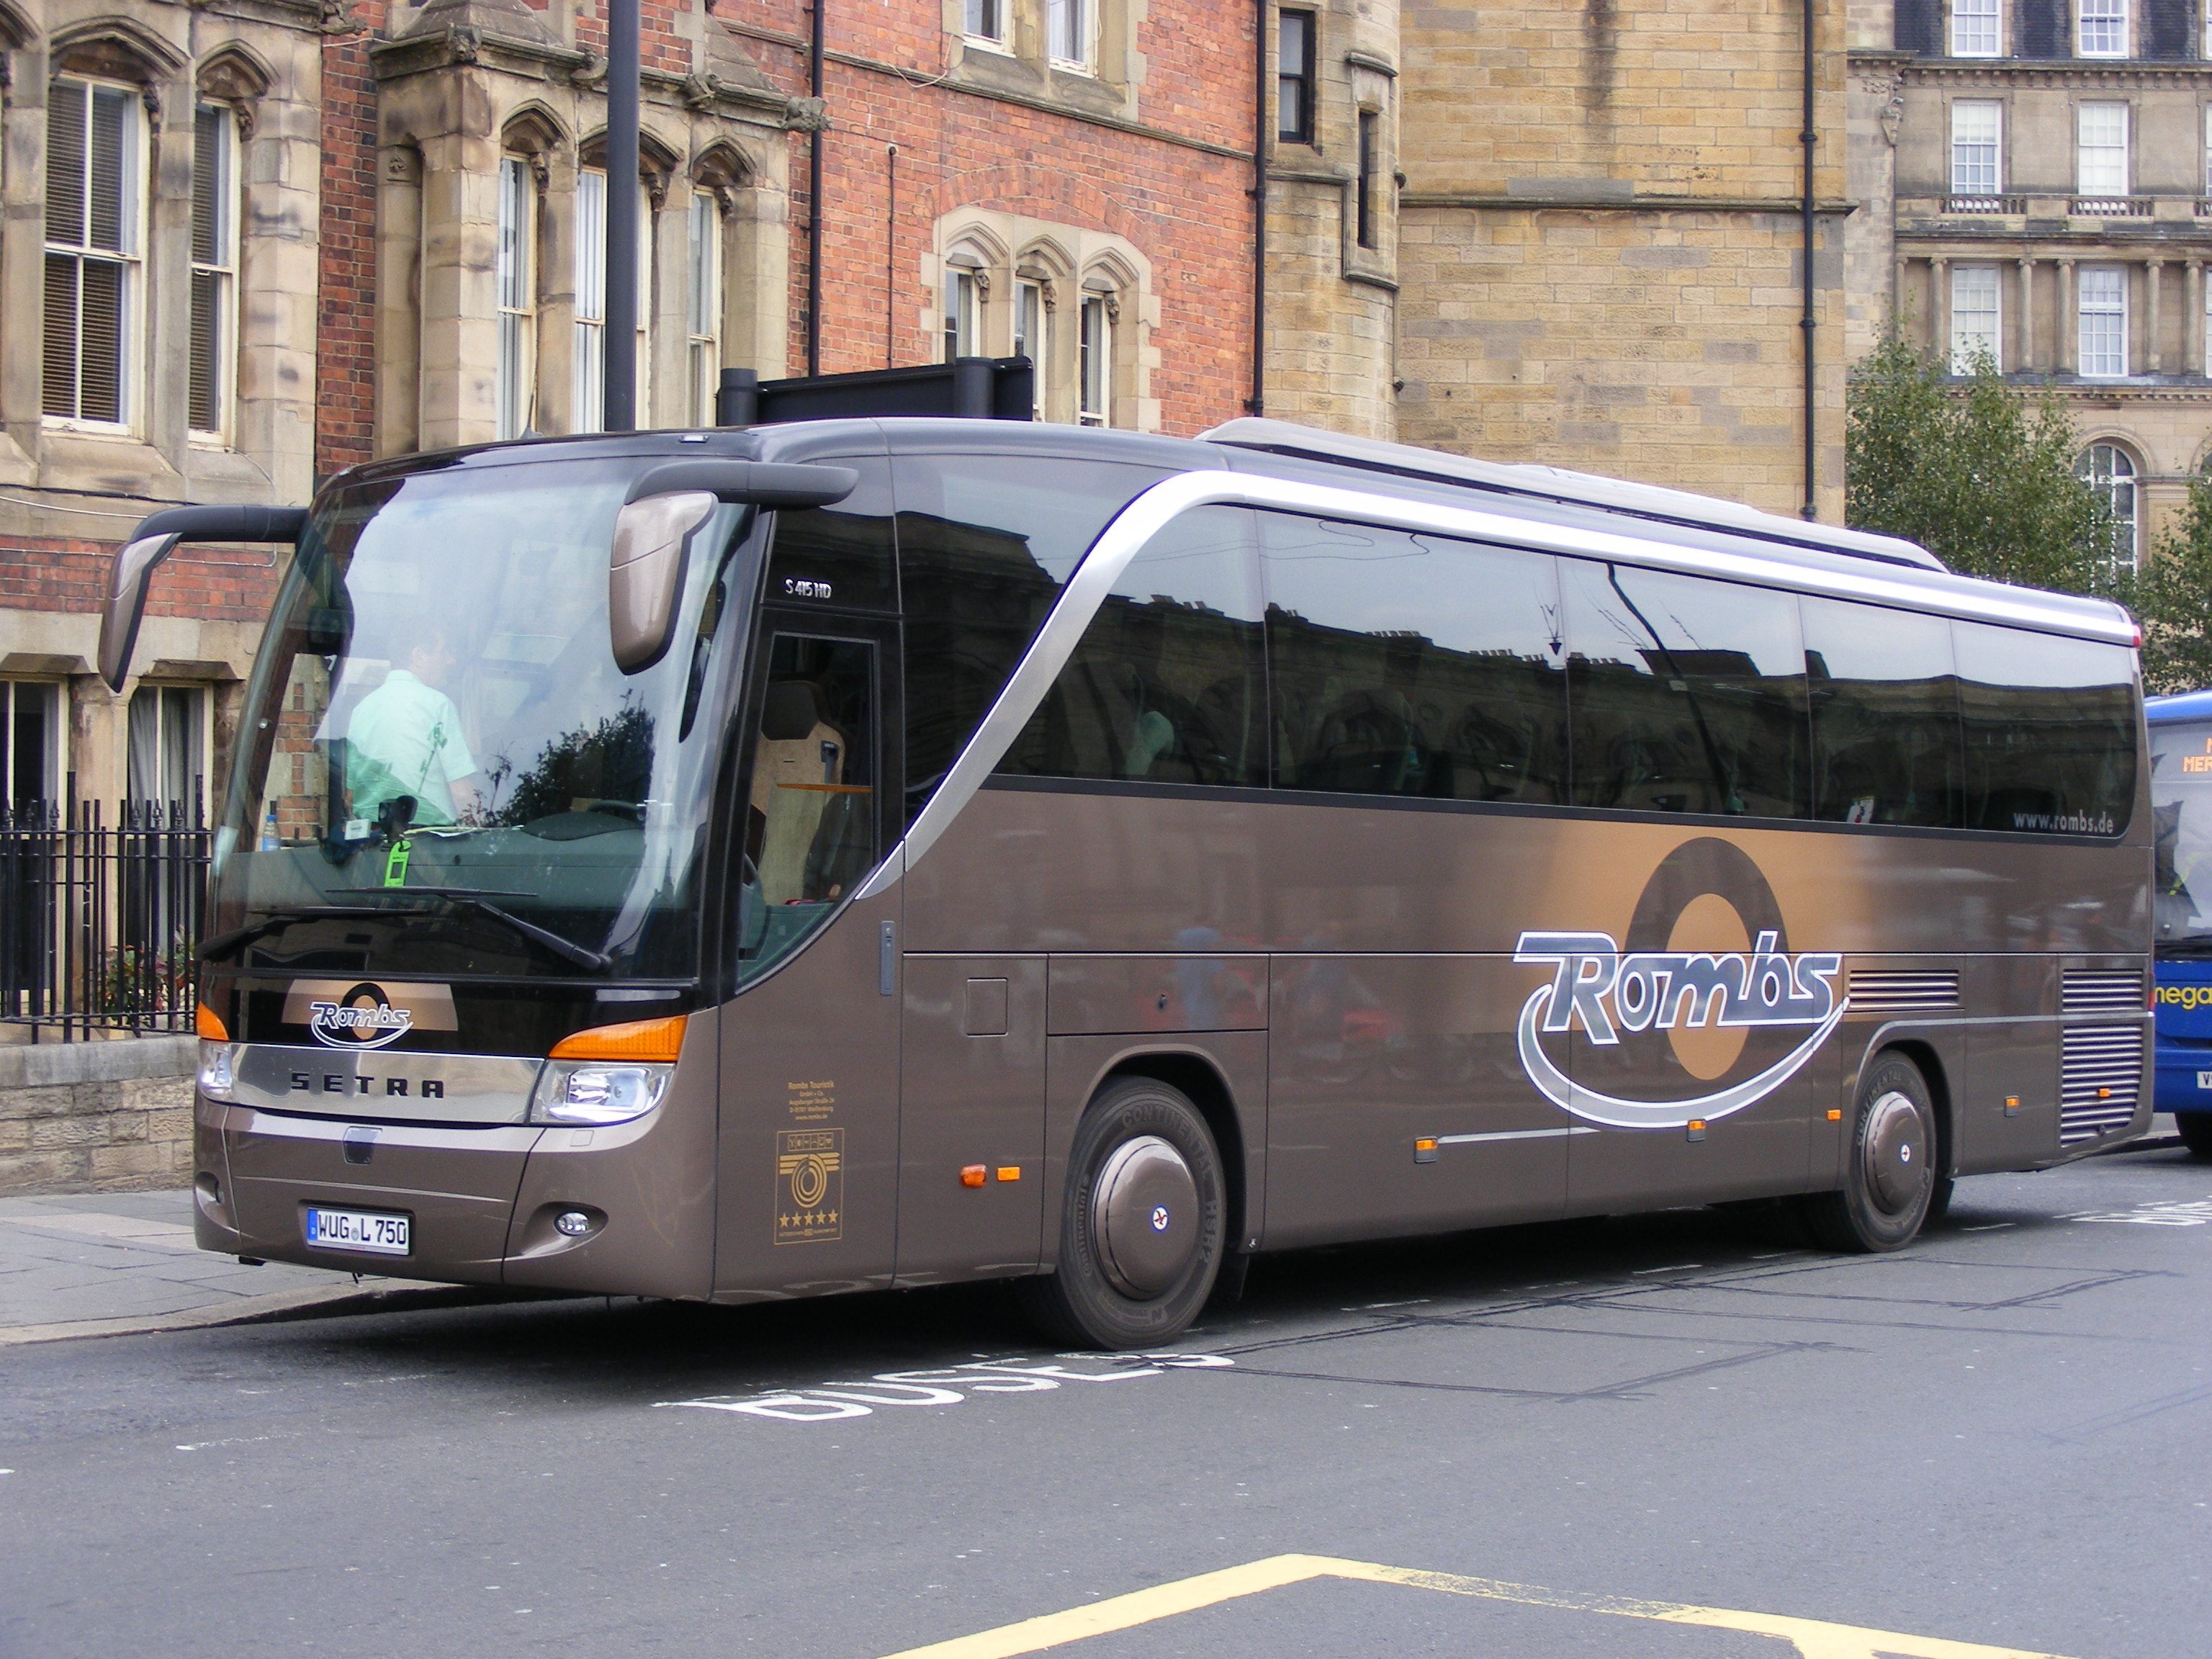 Rombs: WUG-L-750 Setra S 415 HD Newcastle Upon Tyne | Flickr ...